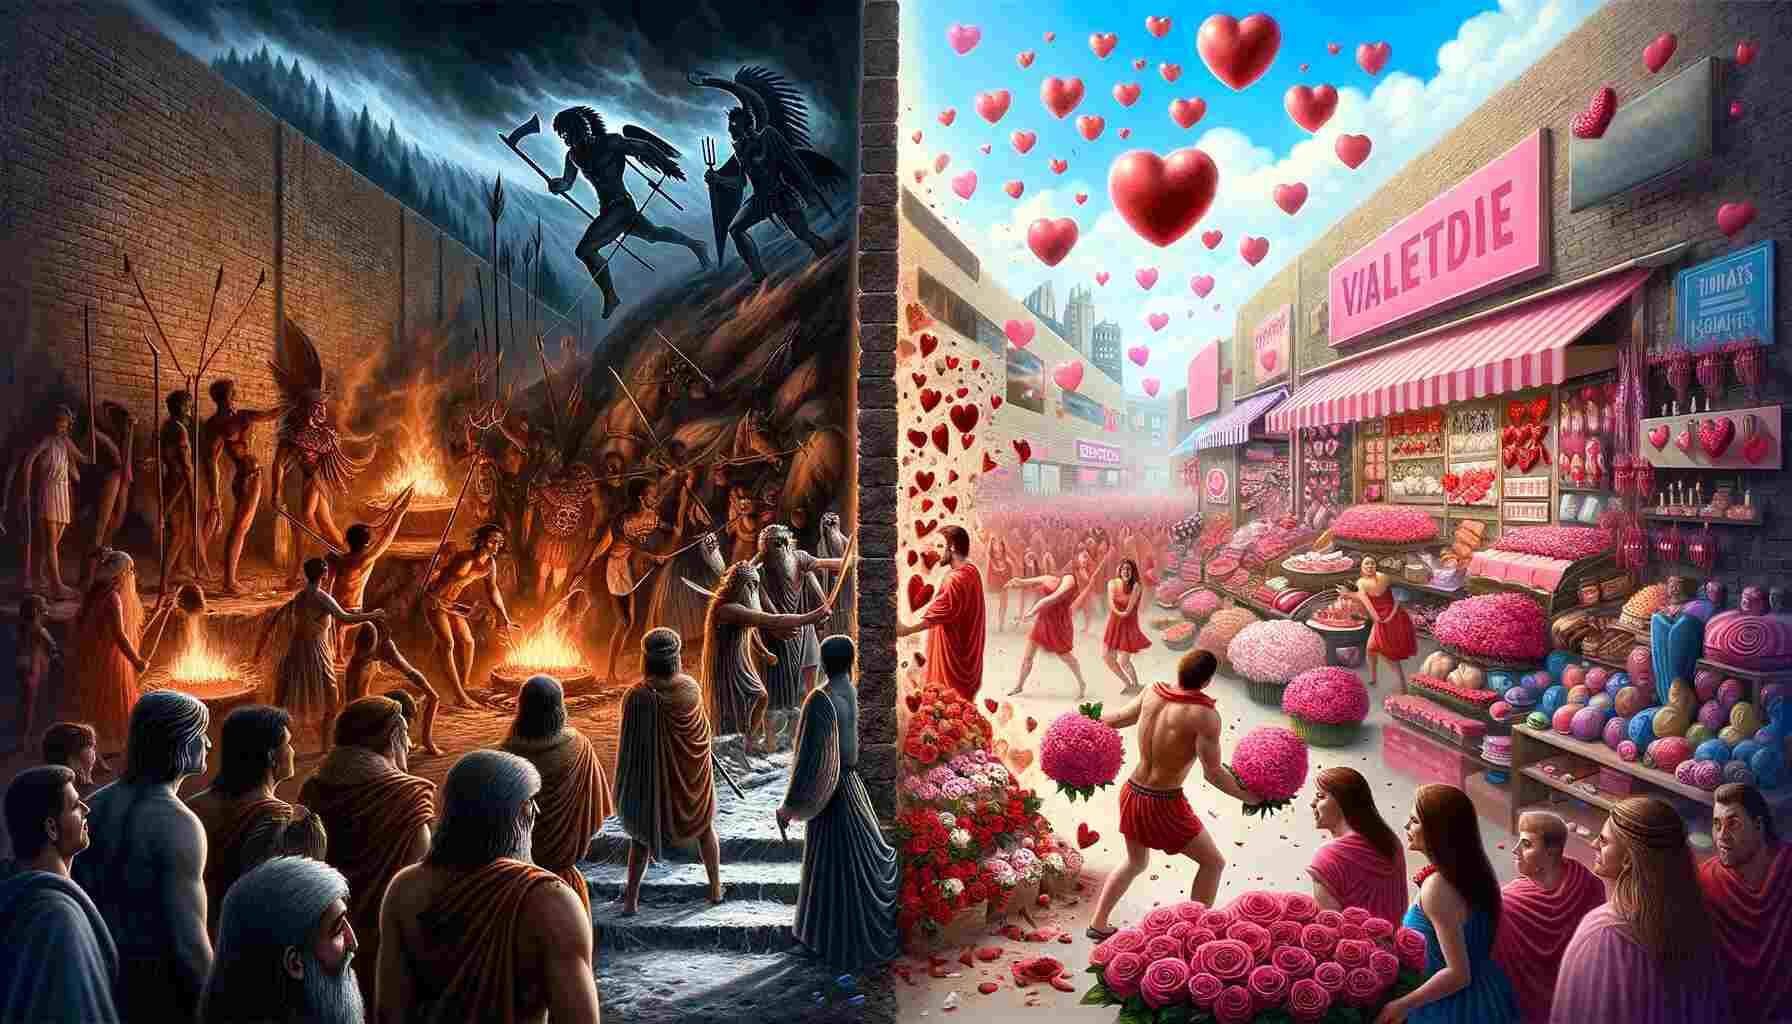 A conceptual image split between the ancient Roman festival of Lupercalia and the modern commercialization of Valentine's Day. The left side portrays the Lupercalia festival with a darker, rustic ambiance, featuring men in ancient Roman attire performing rituals. The right side is brightly colored in pink and red, showcasing an abundance of Valentine's Day merchandise such as roses, chocolates, and heart-shaped balloons against a backdrop of retail stores, highlighting the contrast between the holiday's origins and its contemporary commercialized celebration.